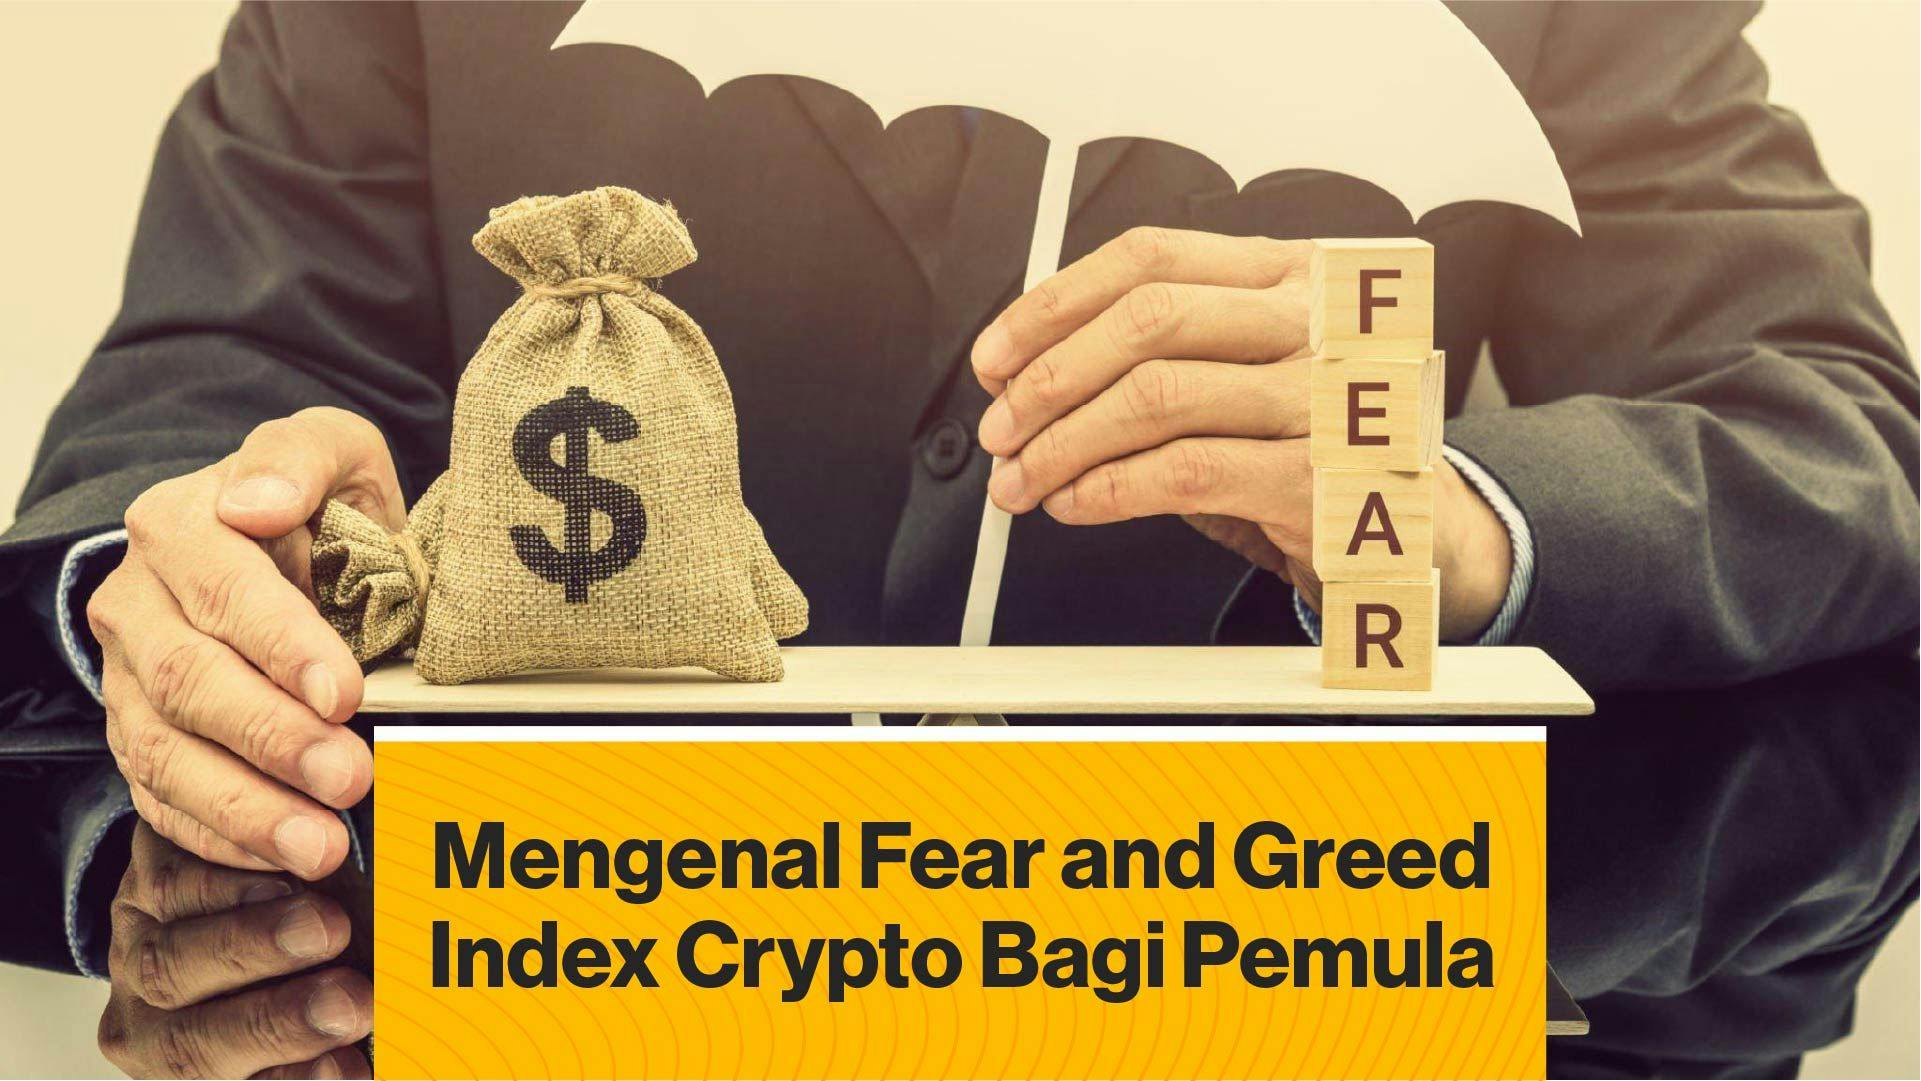 Mengenal Fear and Greed Index Crypto Bagi Pemula (Coindesk Indonesia)